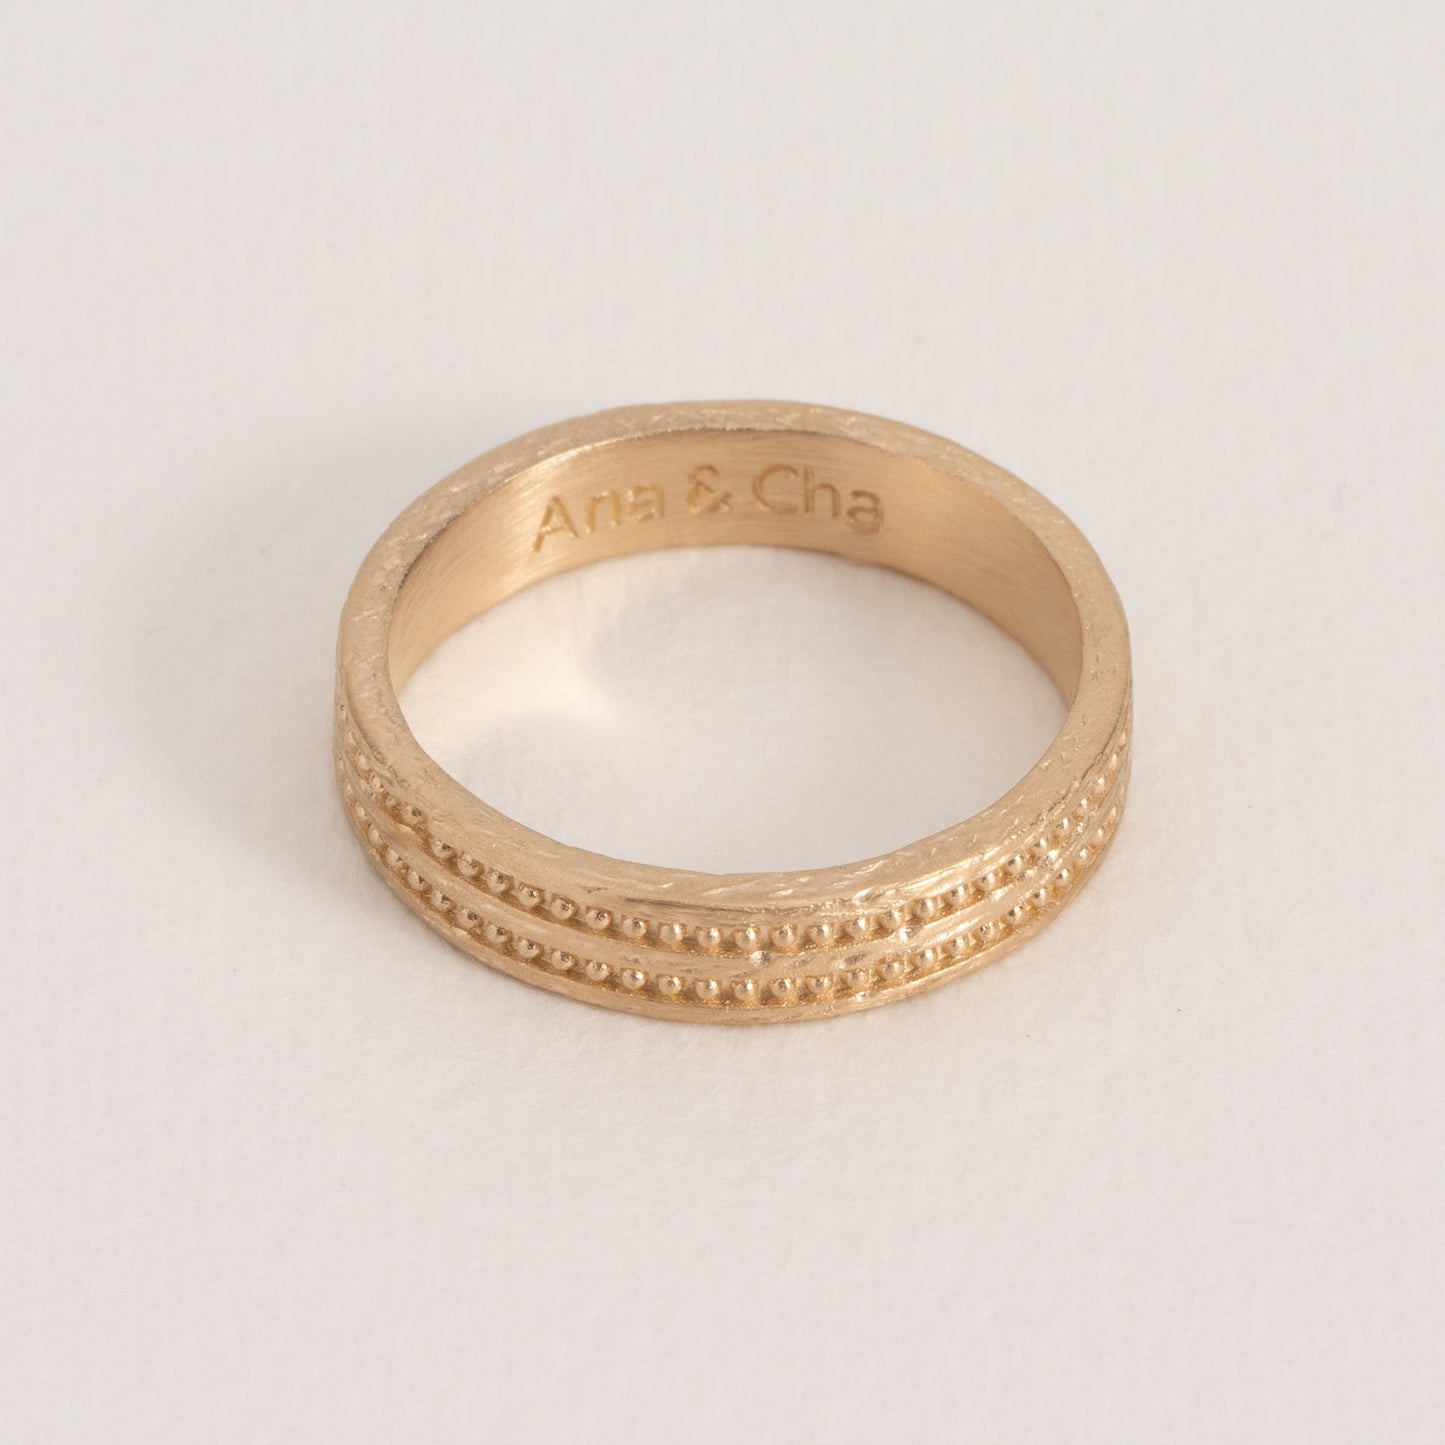 Hanna - Gold Plated Ring - Ana and Cha